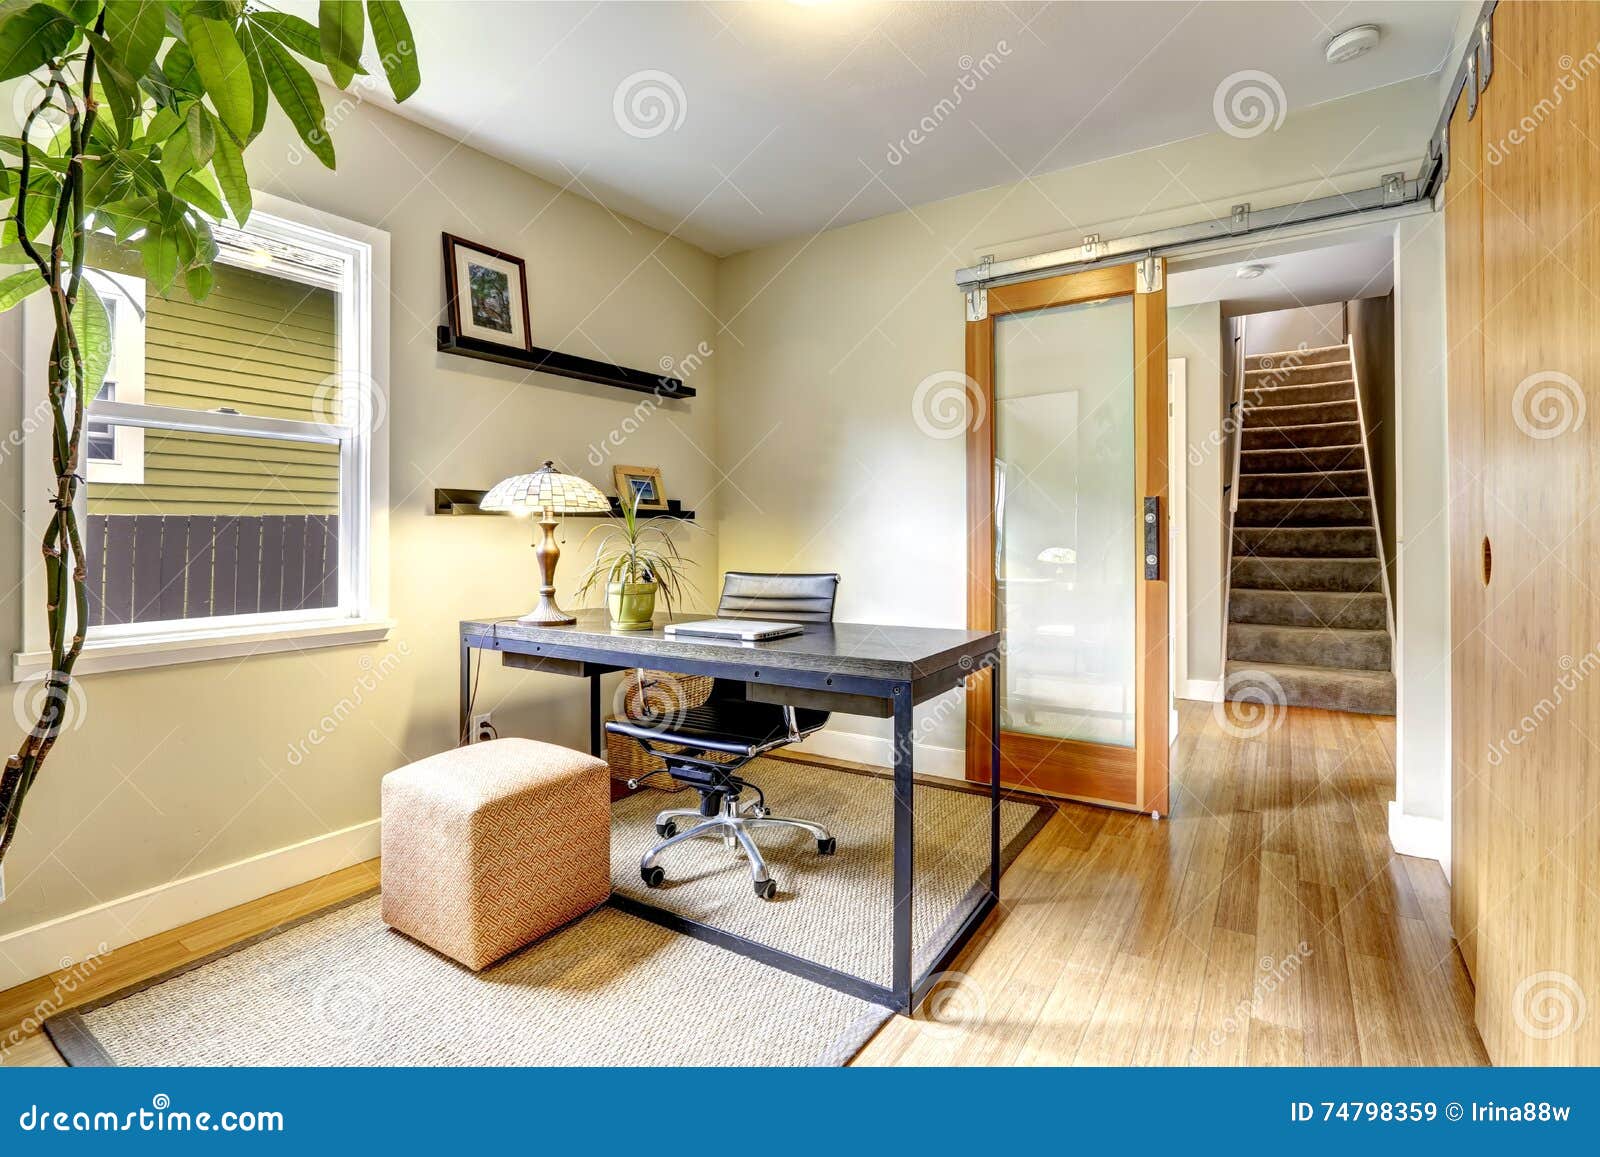 small home office interior with hardwood floor. view of staircase.